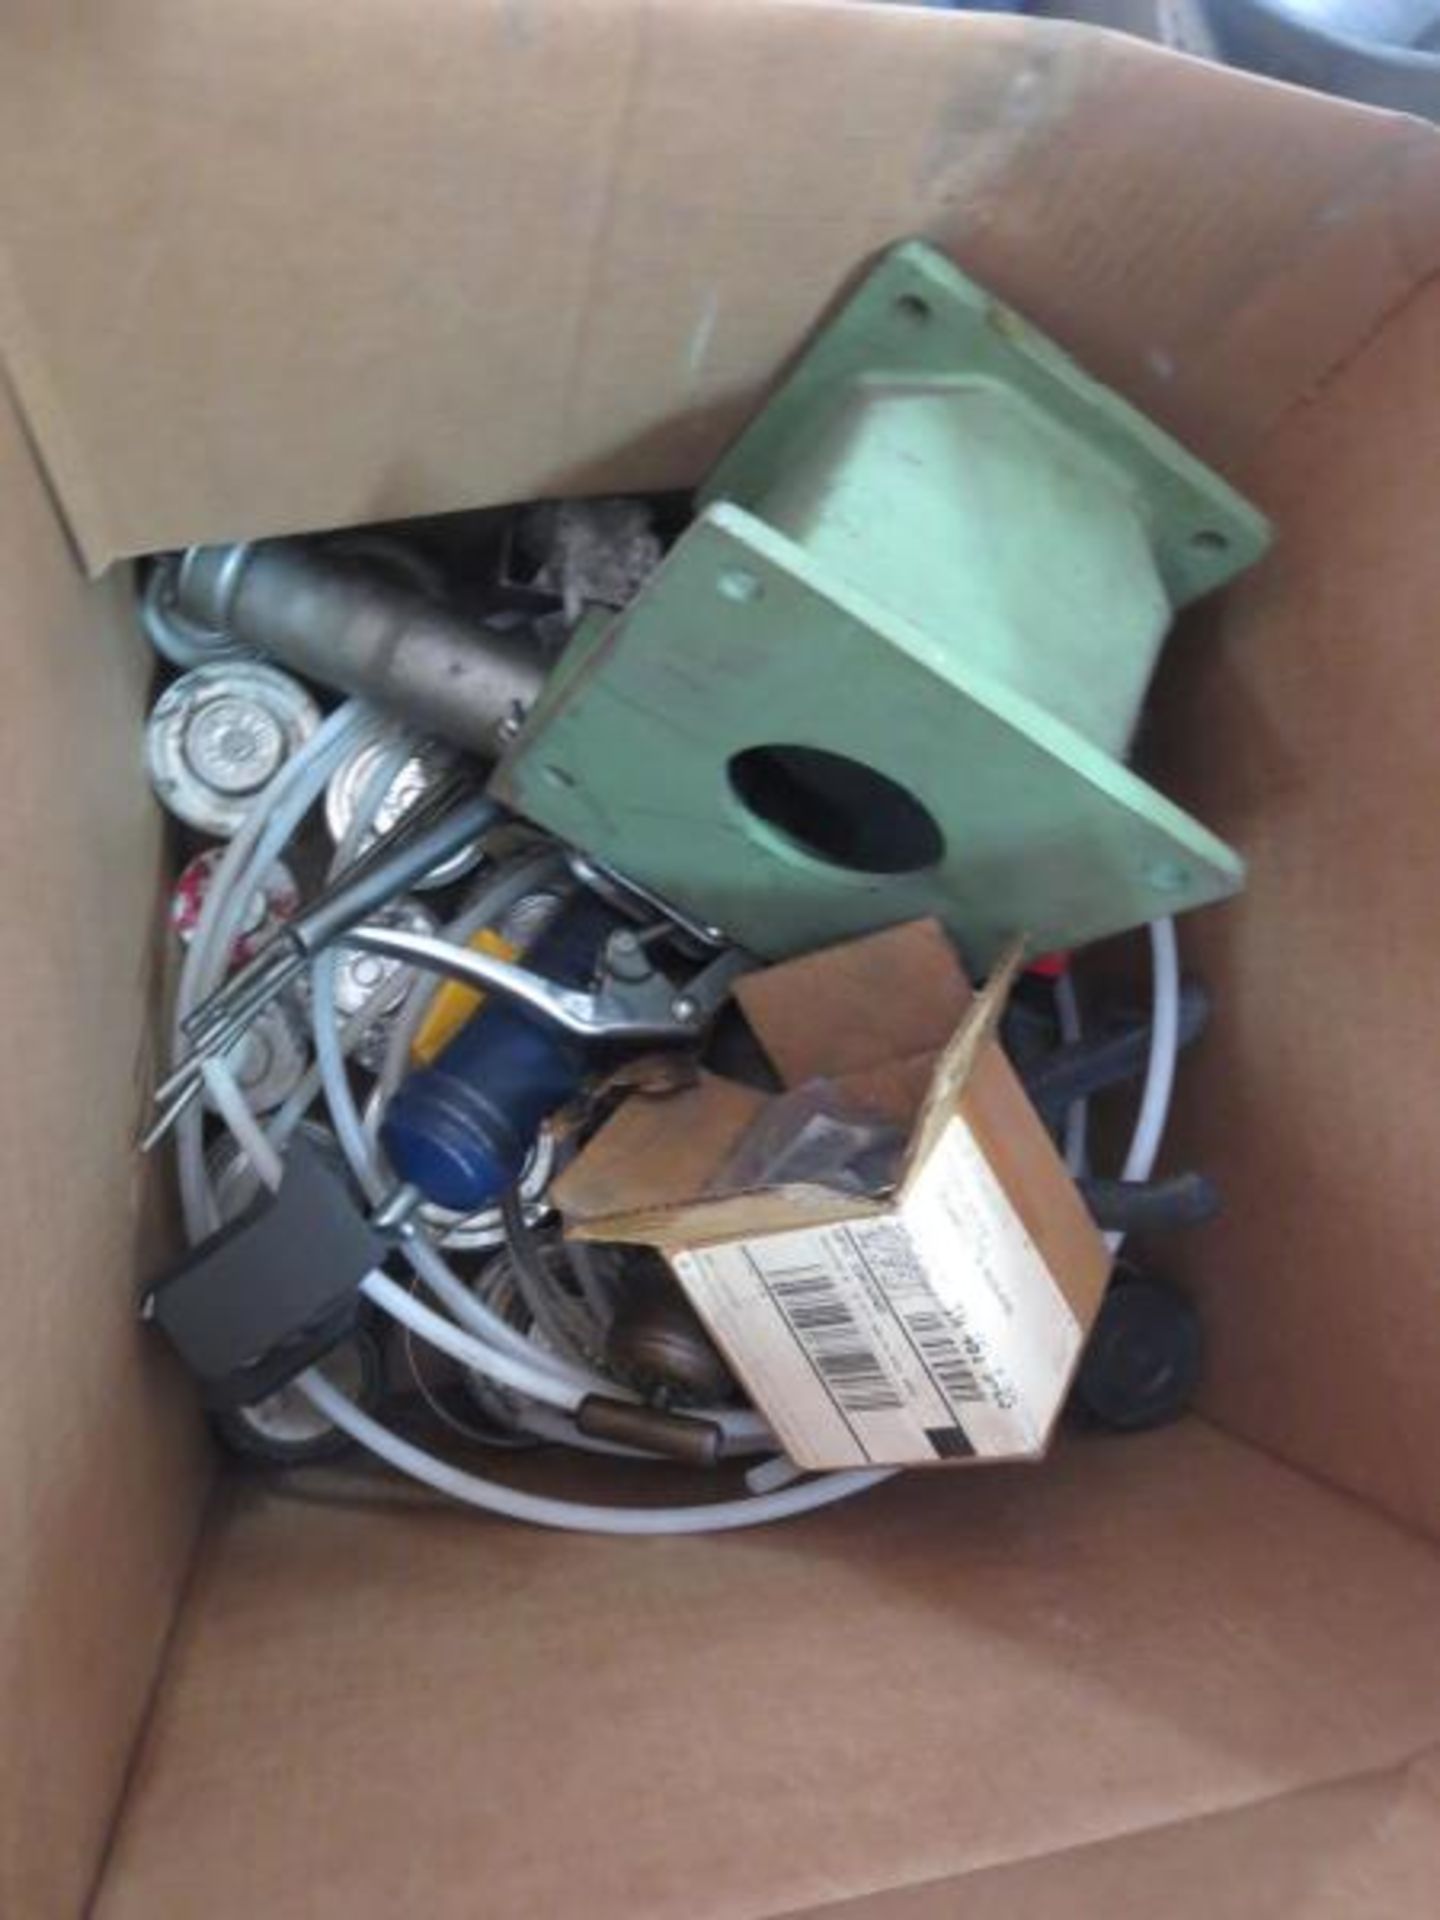 Lot (Qty 5 Skids) Consisting of pipe fittings, Electrical cords, Industrial Lights, Gear box, heavy - Bild 11 aus 18